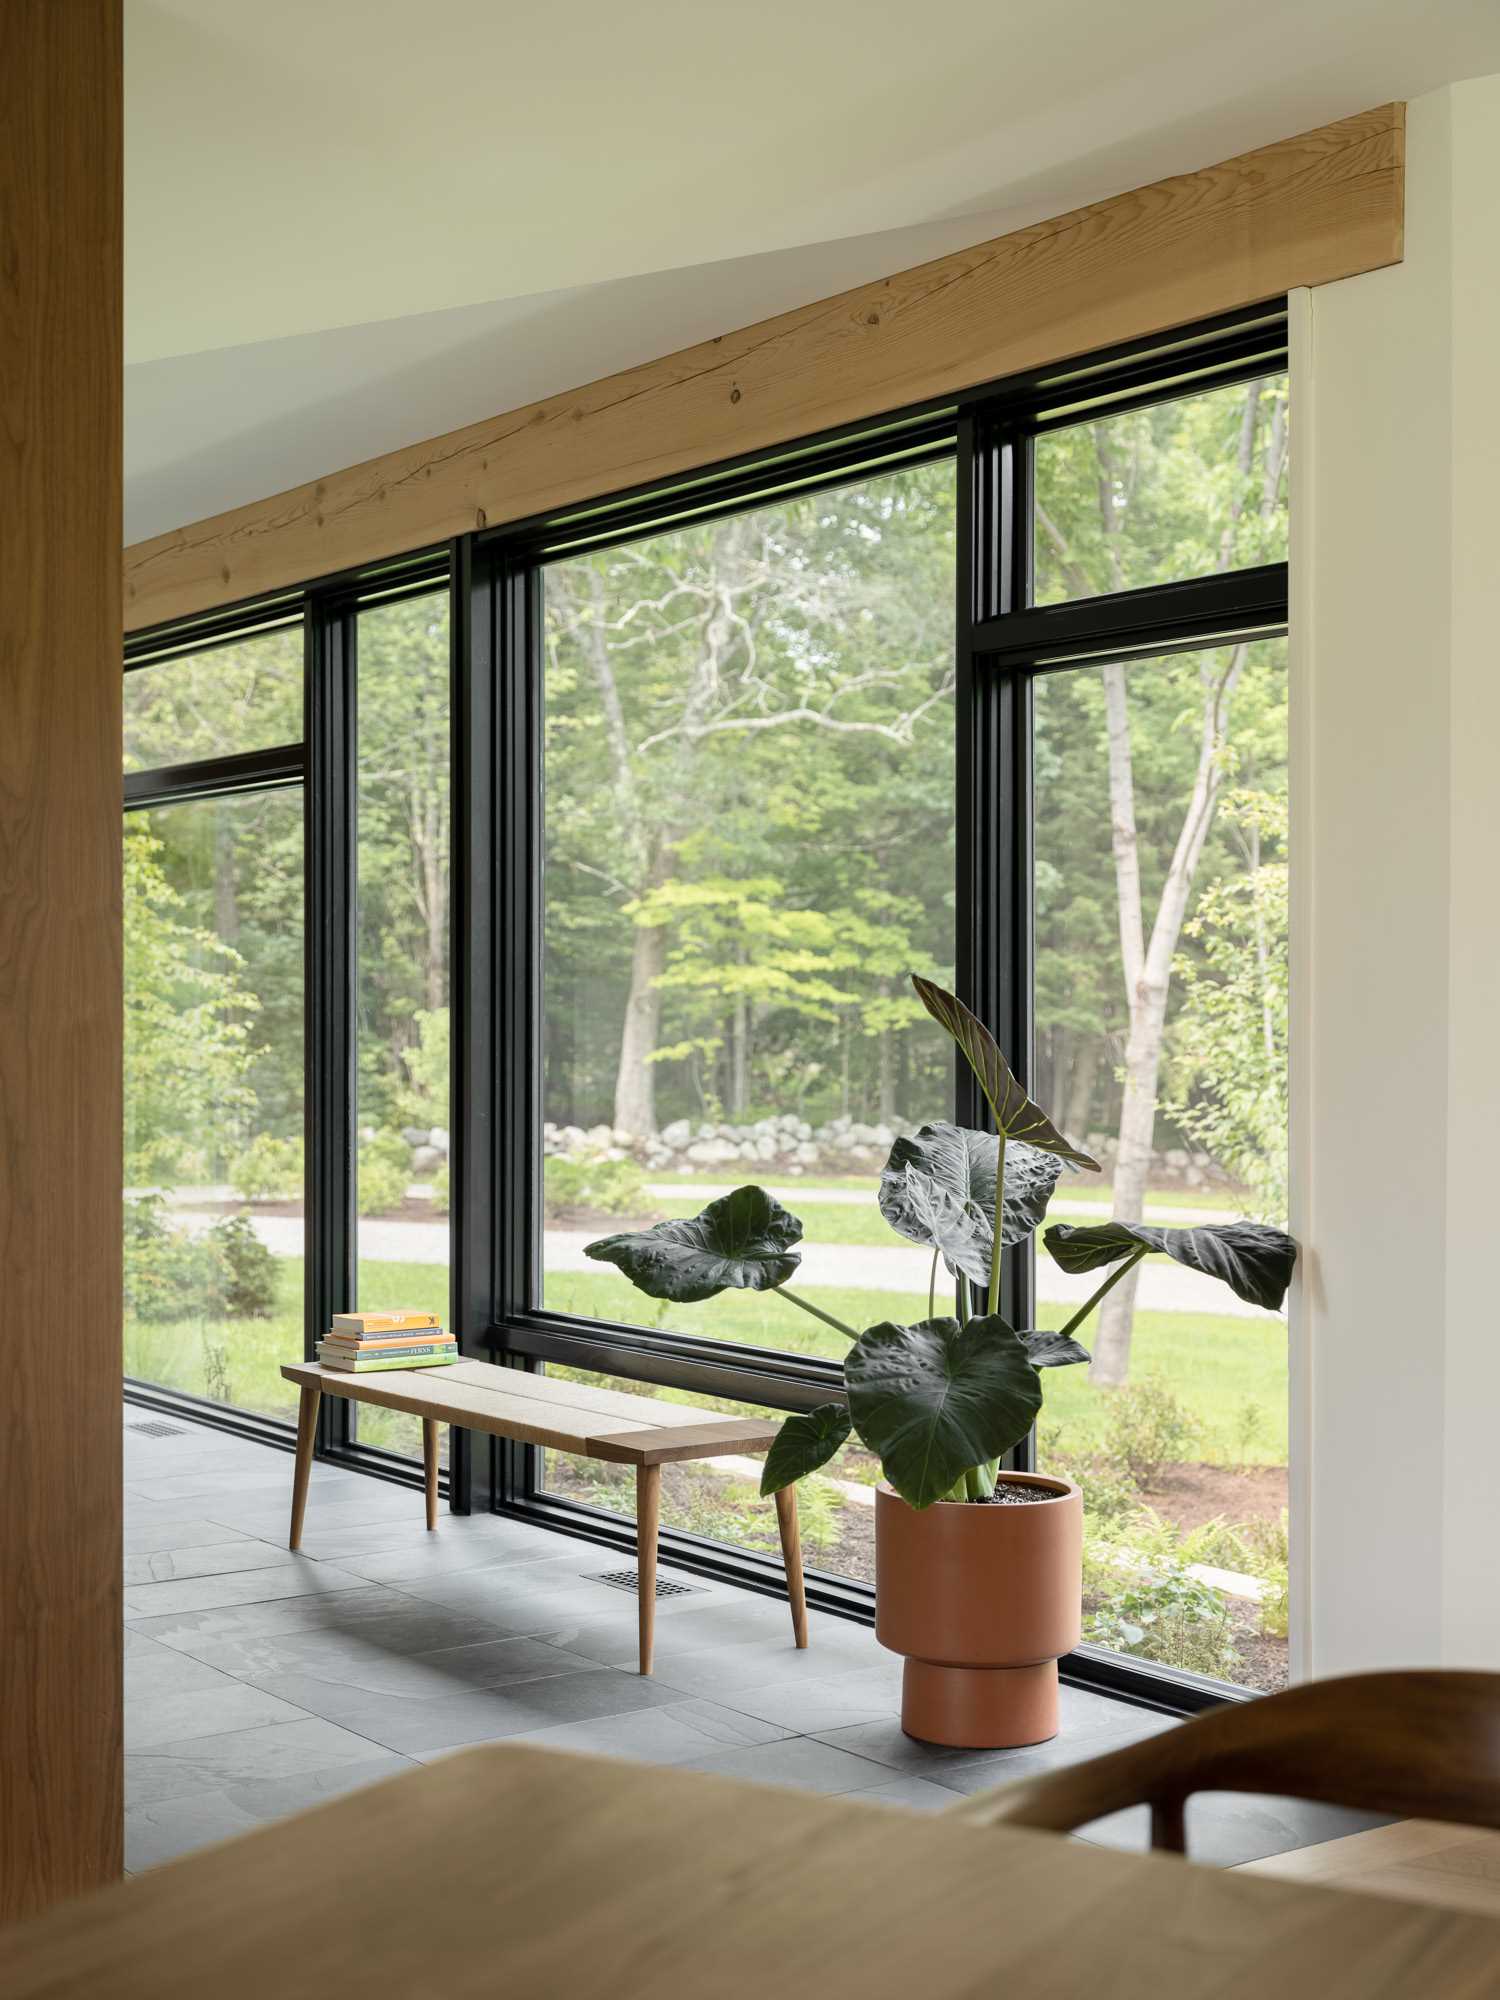 A wall of black-framed windows fills the entryway with natural light.